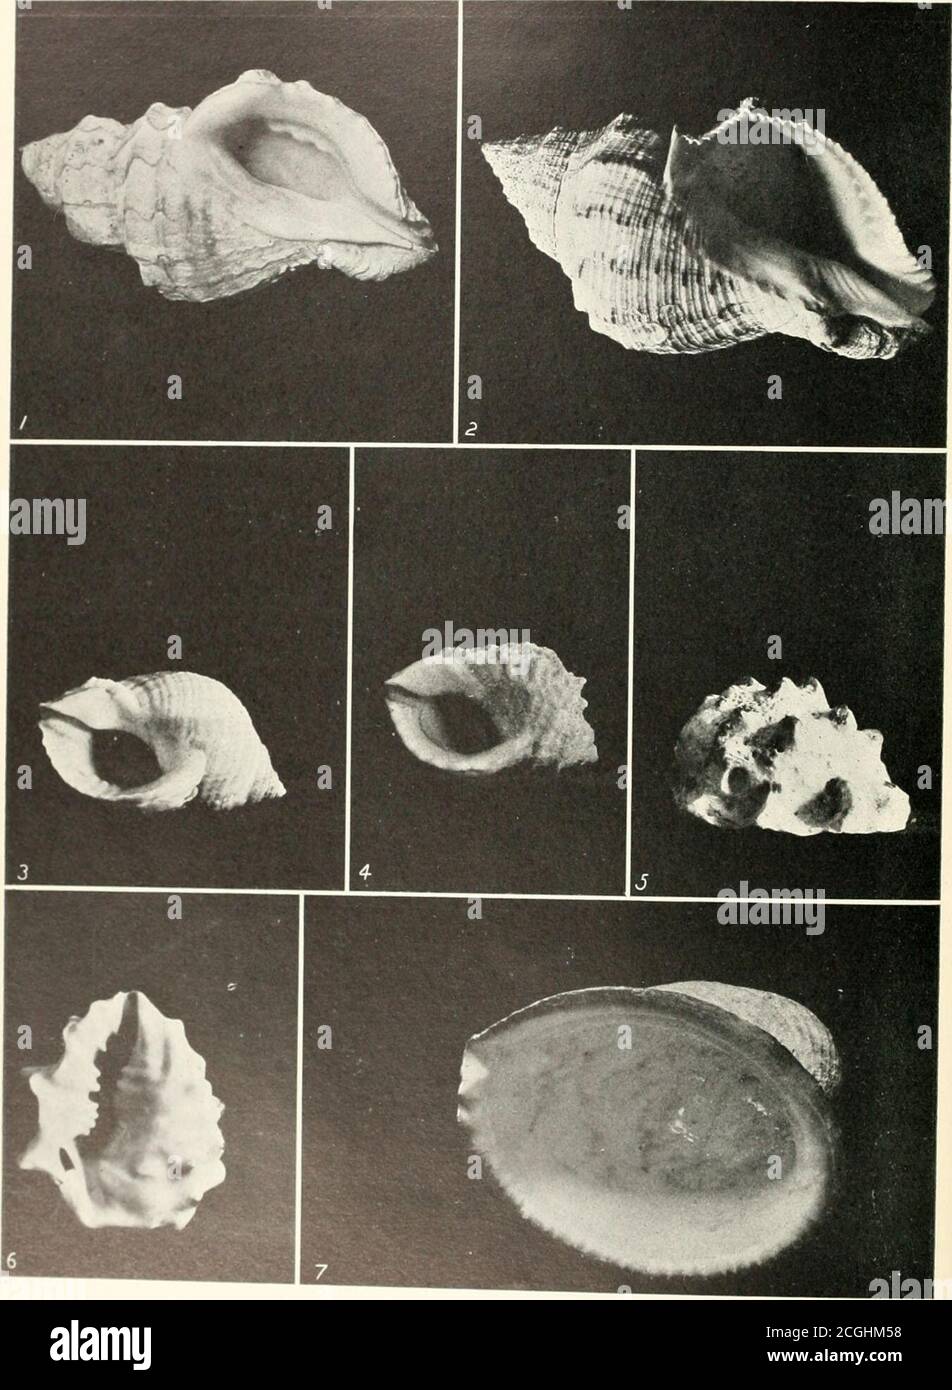 . The shell book . TROPHONS, DRILL AND EUPLEURA 1 Trophon triangulatus. 2 Trophon triangulatus. Trophon Belcheri.Trophon clatkrotus. Urosalpinx cincrea.Eupleura caudaia.. ; AND XKAR KKIIVKS I WrinkW P« I p IVKS 5-? SrbE?r?!S^ The Purples. Dog Winkles vein or sac on the back of the body. Its use to its owner is thesame as the ink of the common squid. A jet of ink colours thewater, and enables the pursued to escape from an enemy. Wecan understand how hard and tedious was the process of obtainingthis dye in quantities. The complex art of blending the juices to produce the desiredplay of colouring Stock Photo